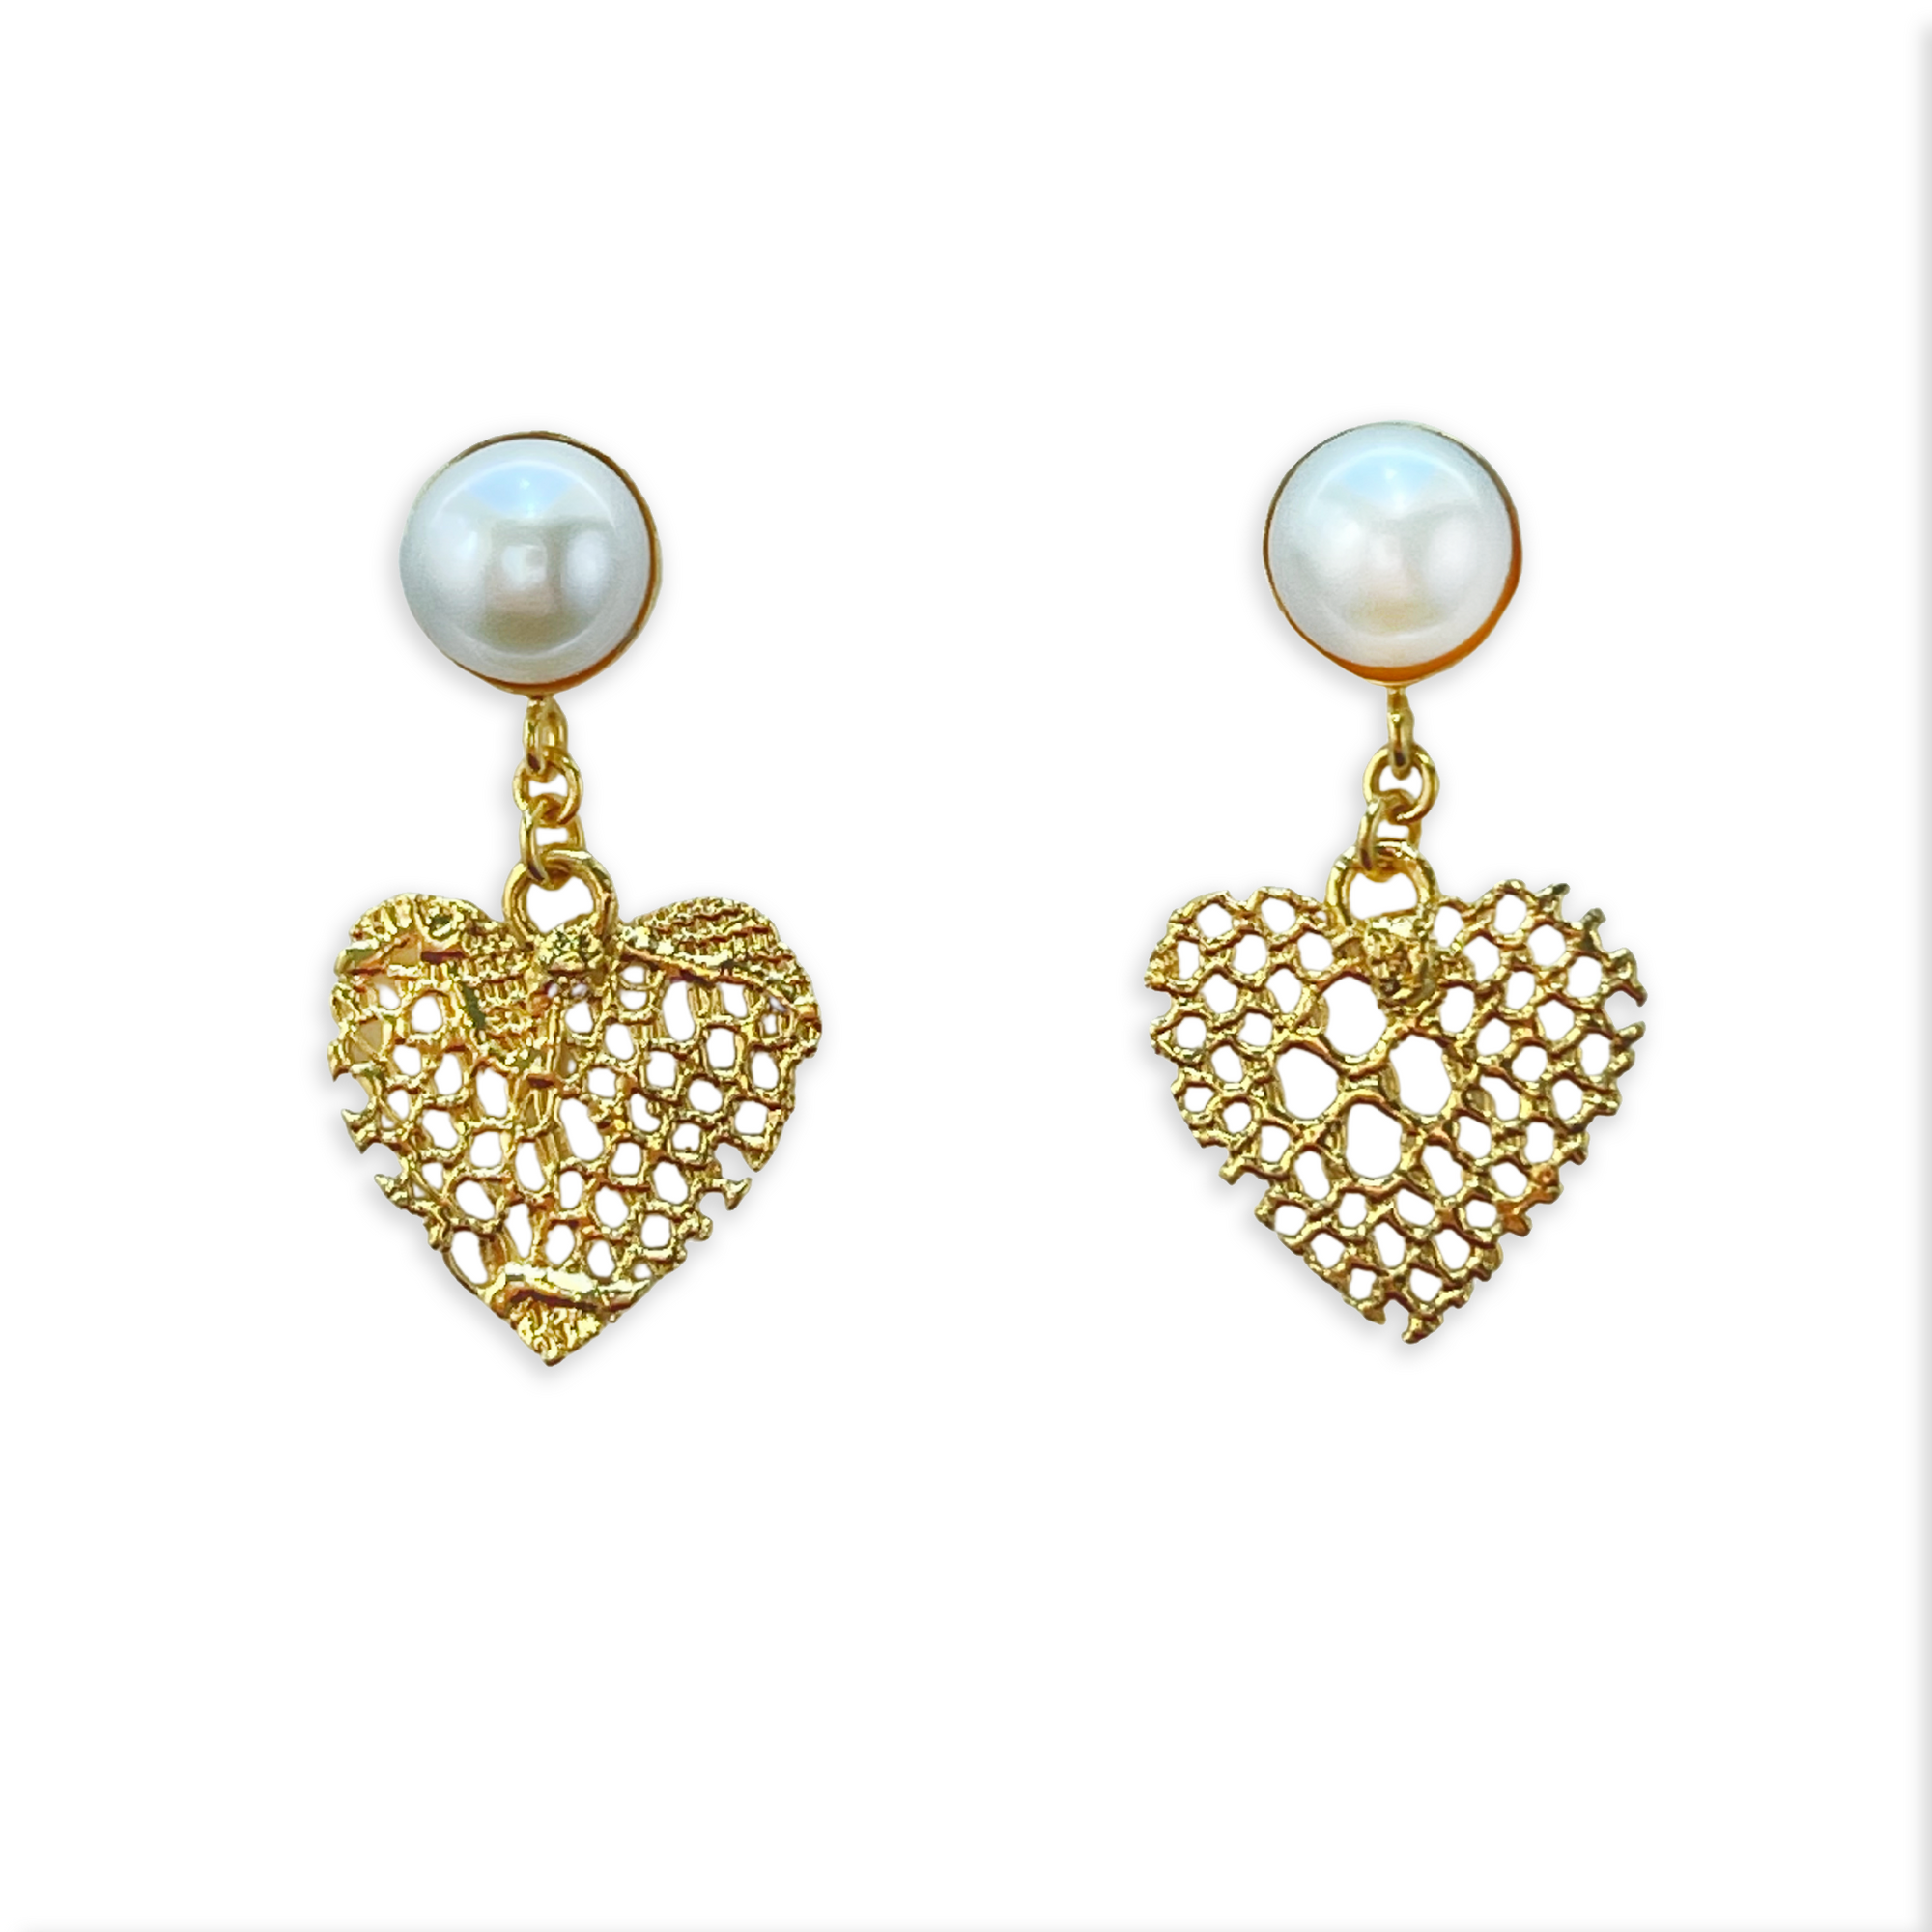 Pearl earrings with rose gold lace heart.